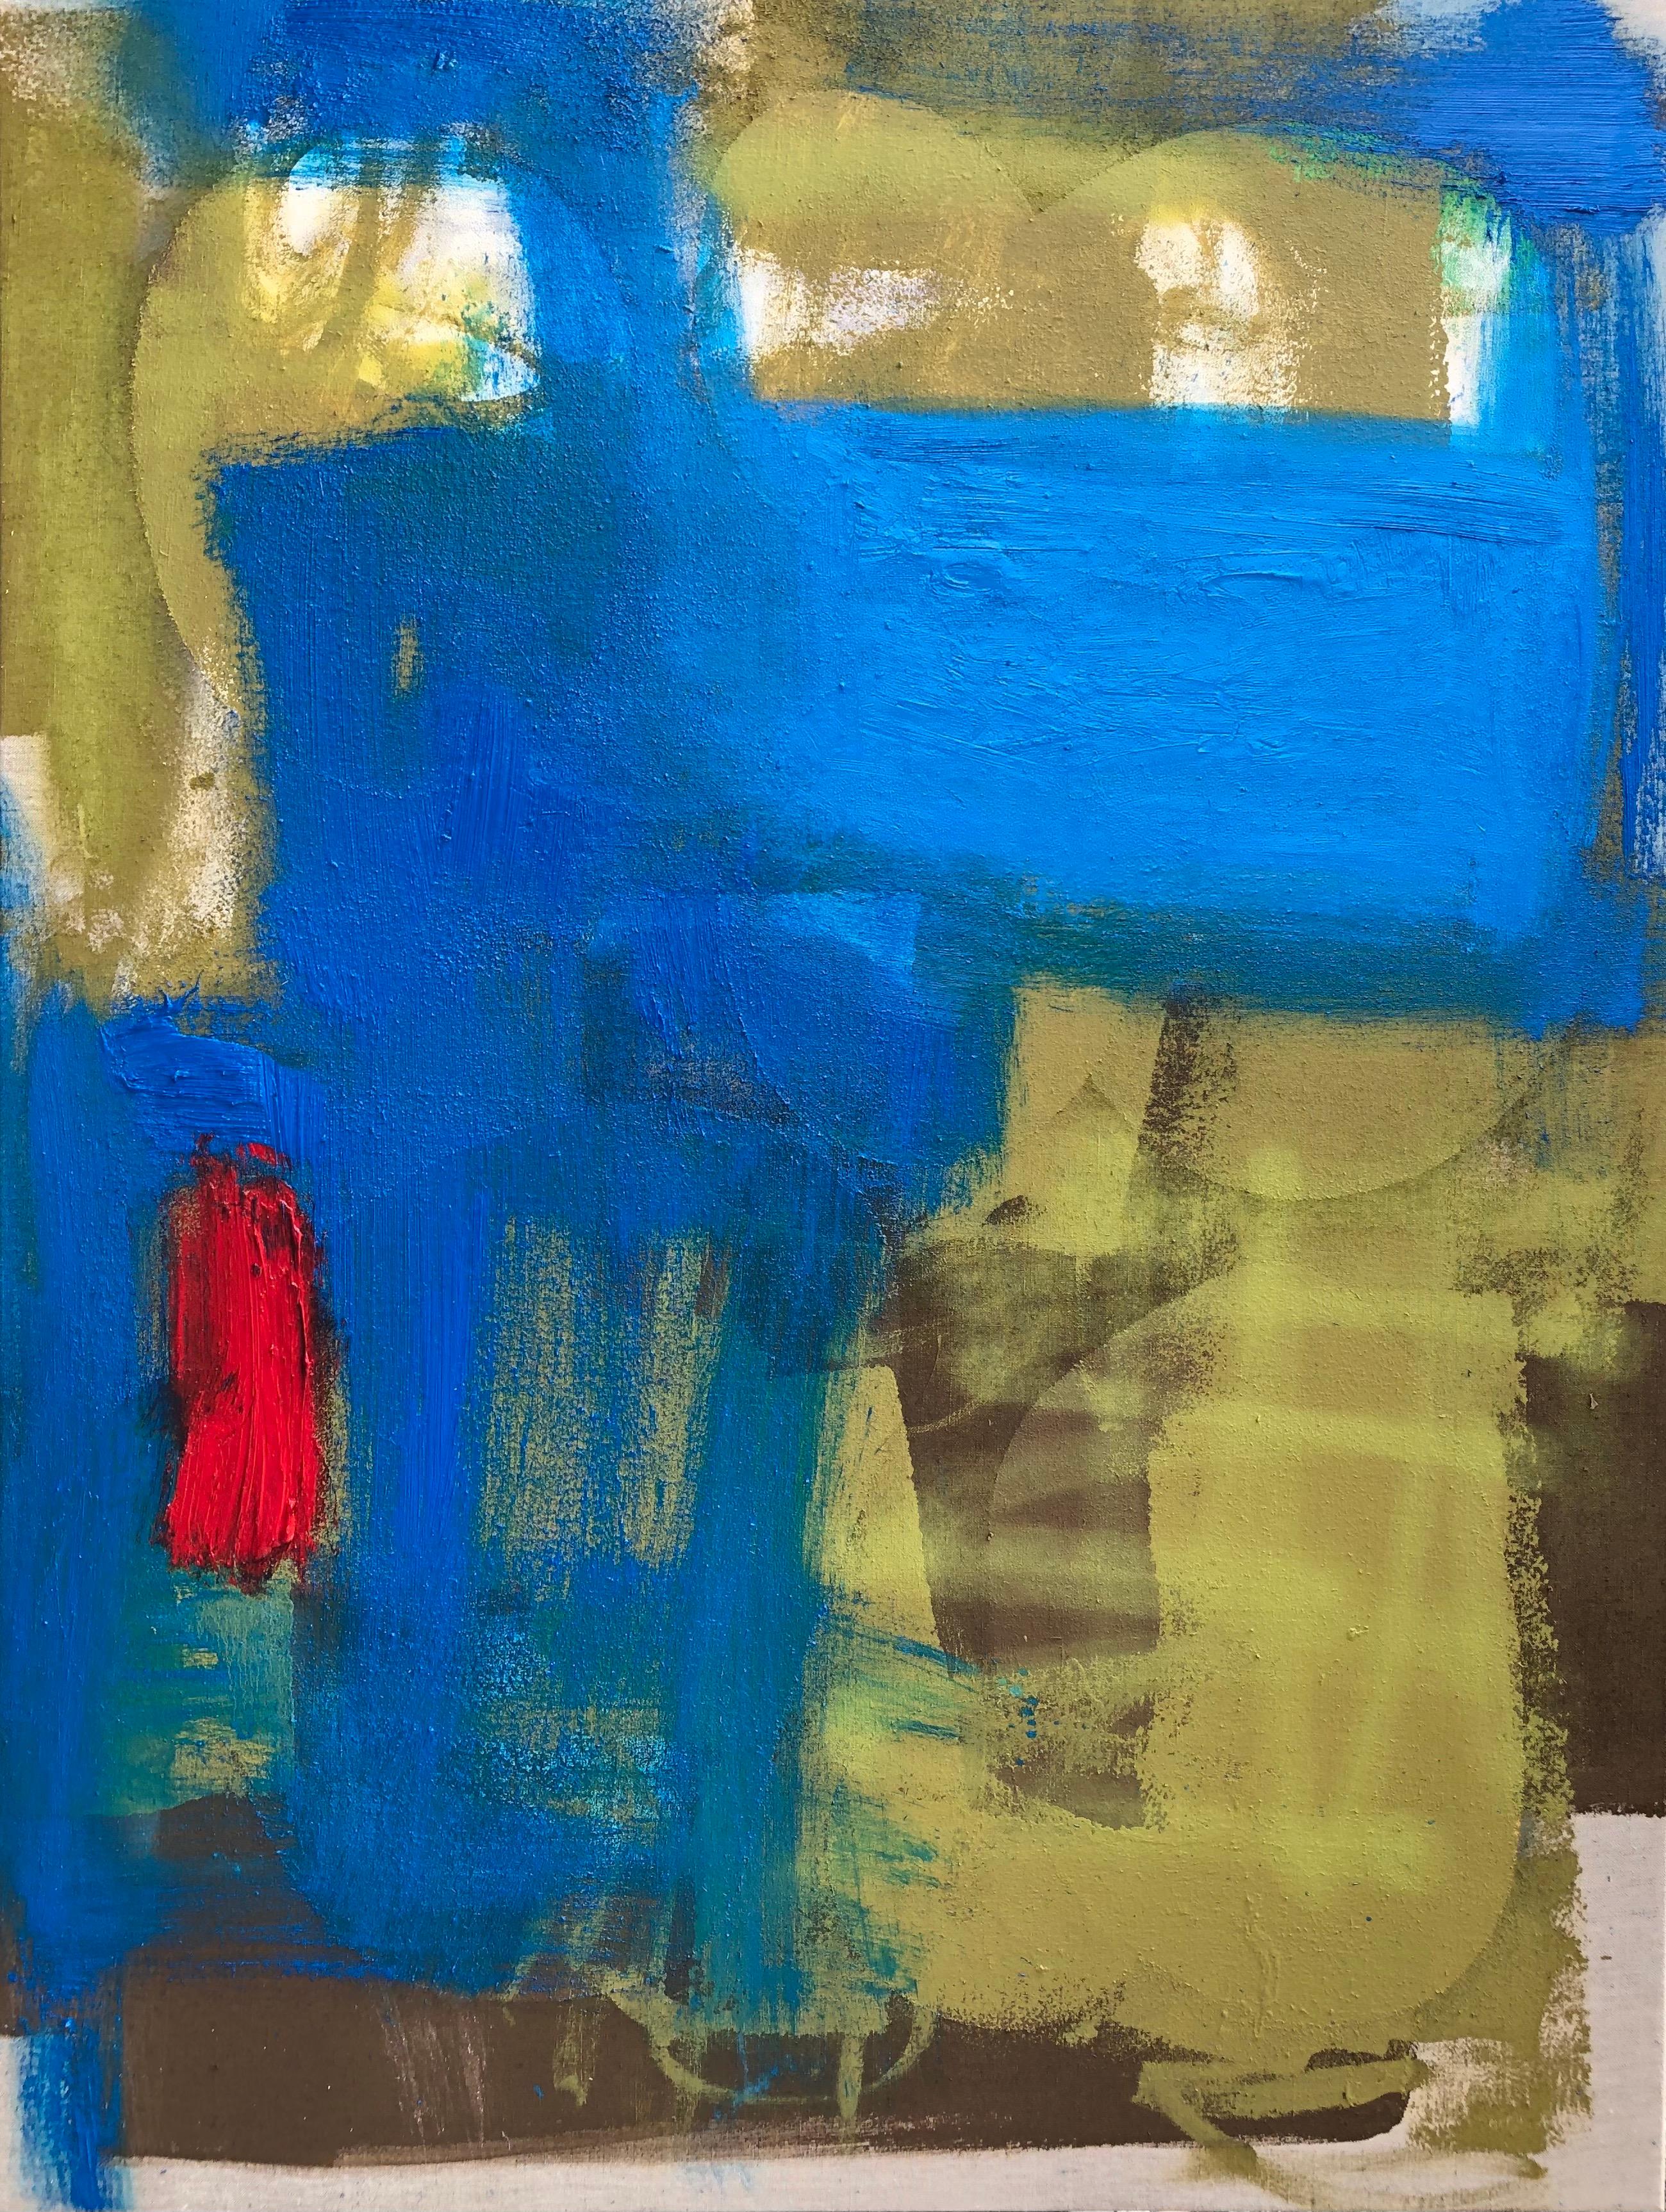 Mirtha Moreno Abstract Painting - Original Oil Painting on Canvas Titled: Blue Monday